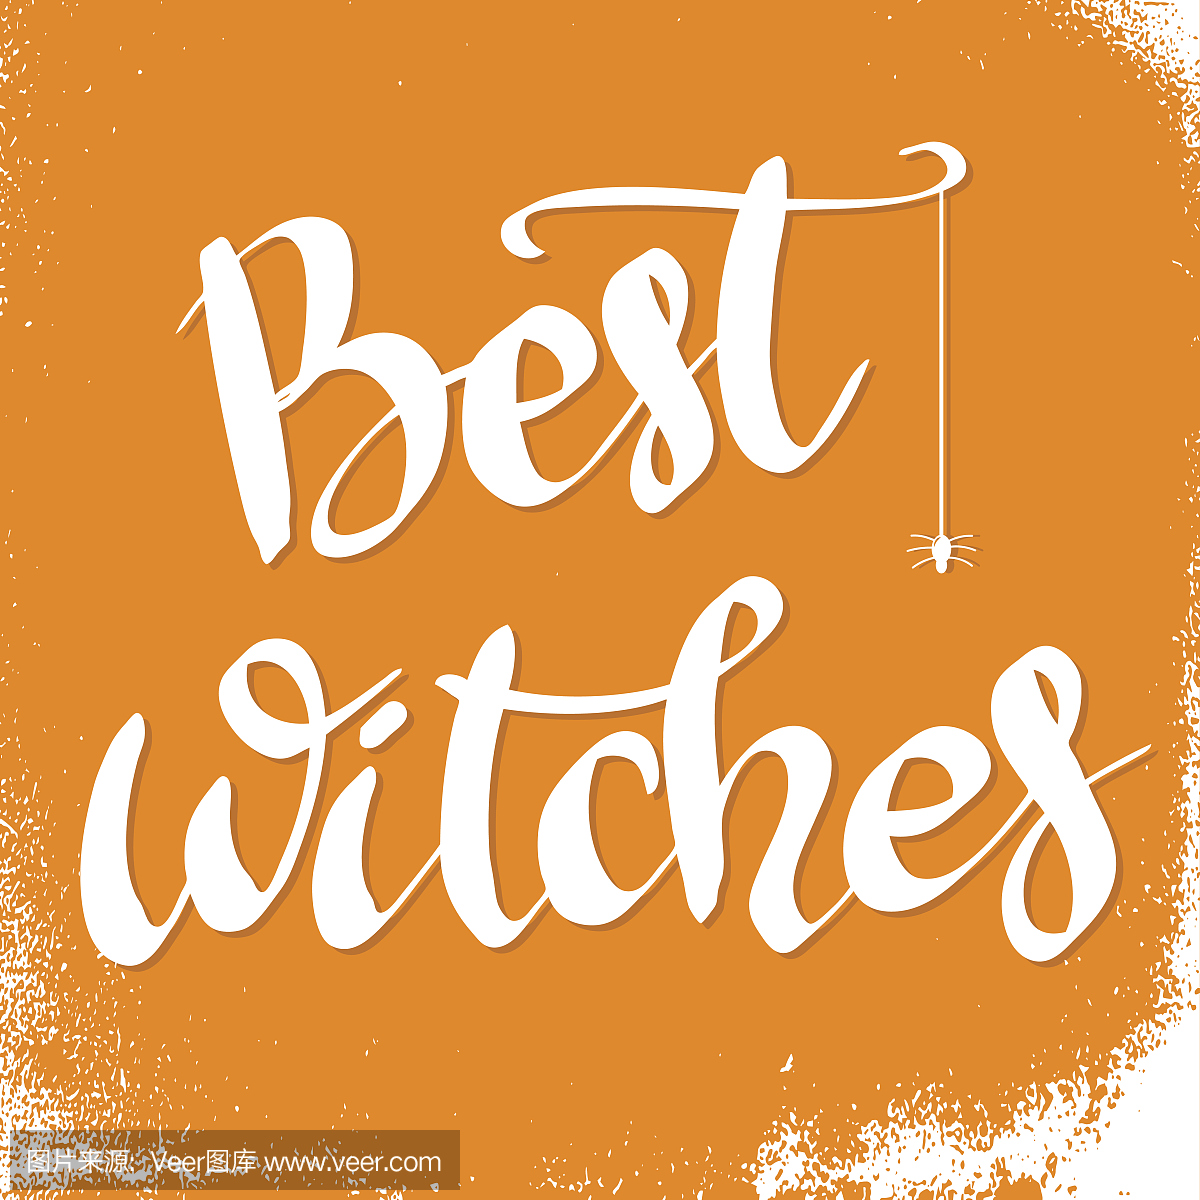 Best Witches. Hand drawn lettering phrase. Ha